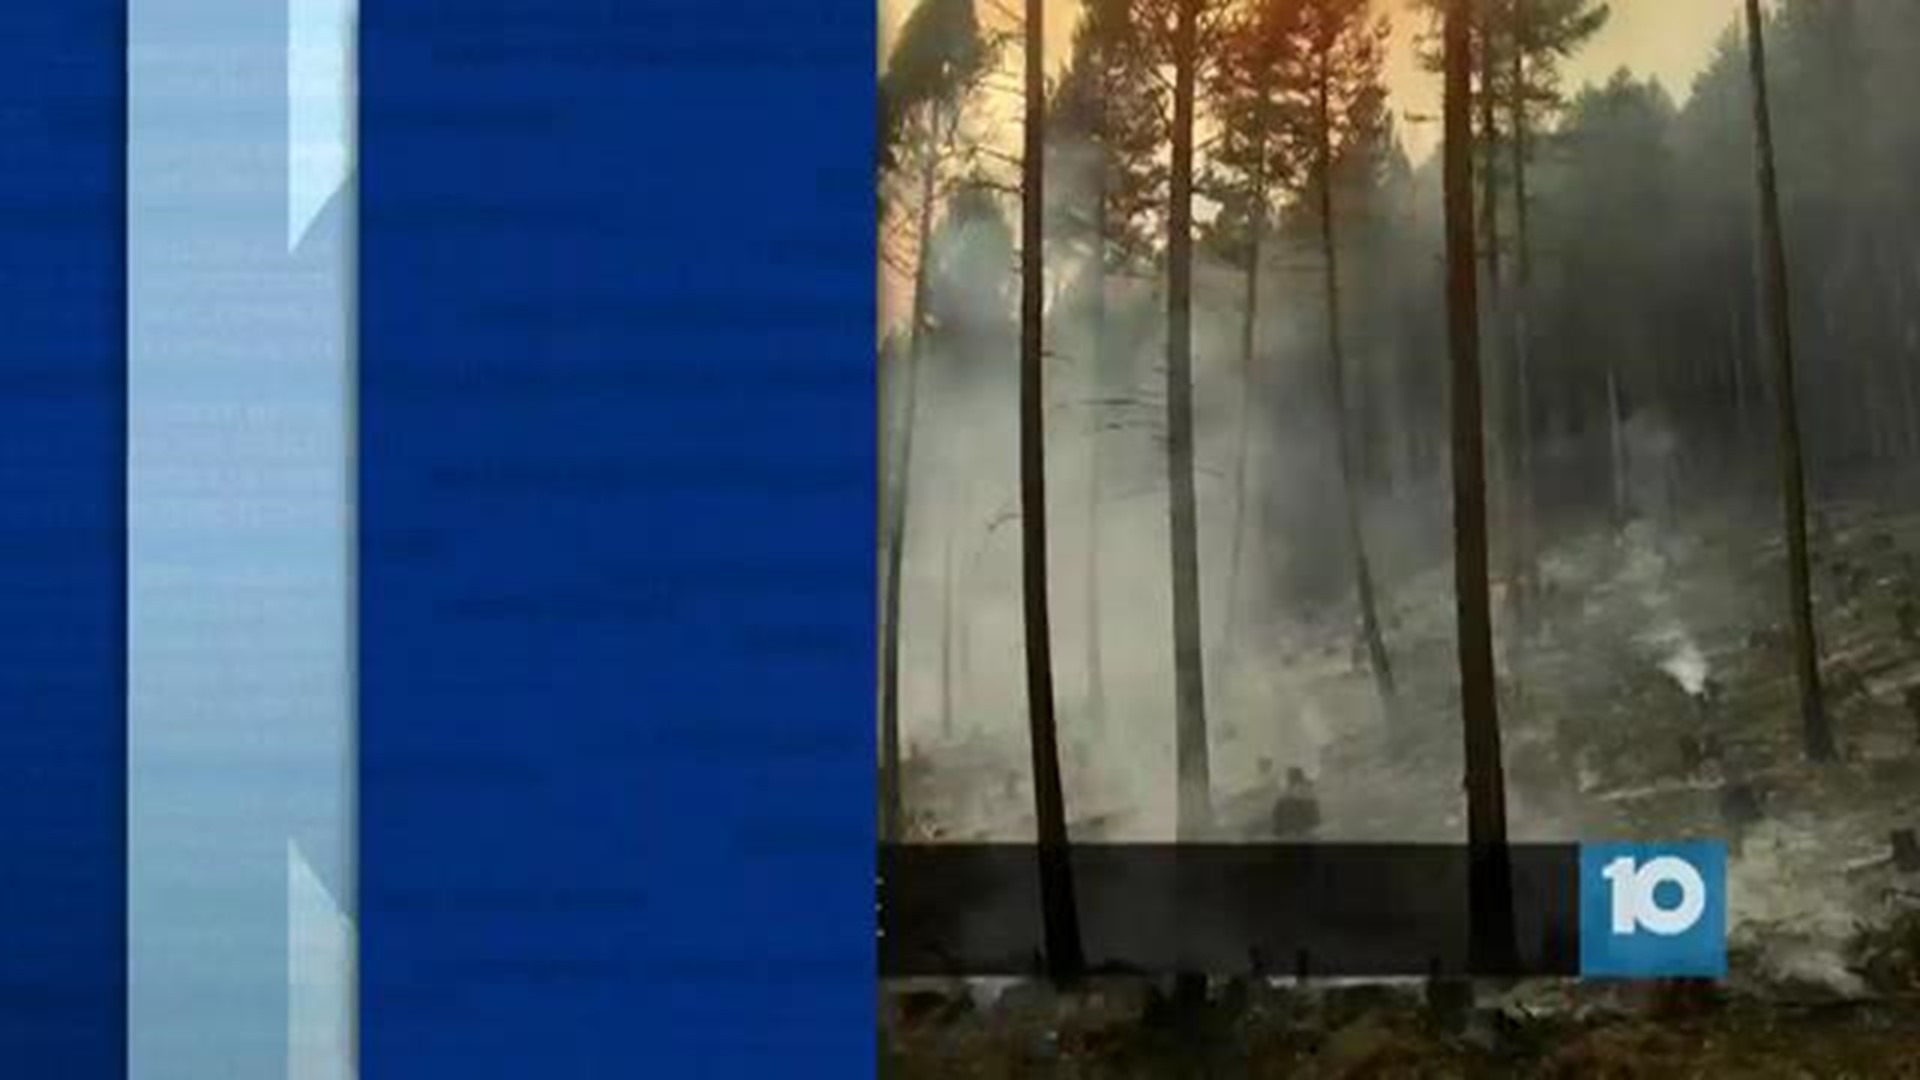 Firefighters return from battling wildfires in Montana